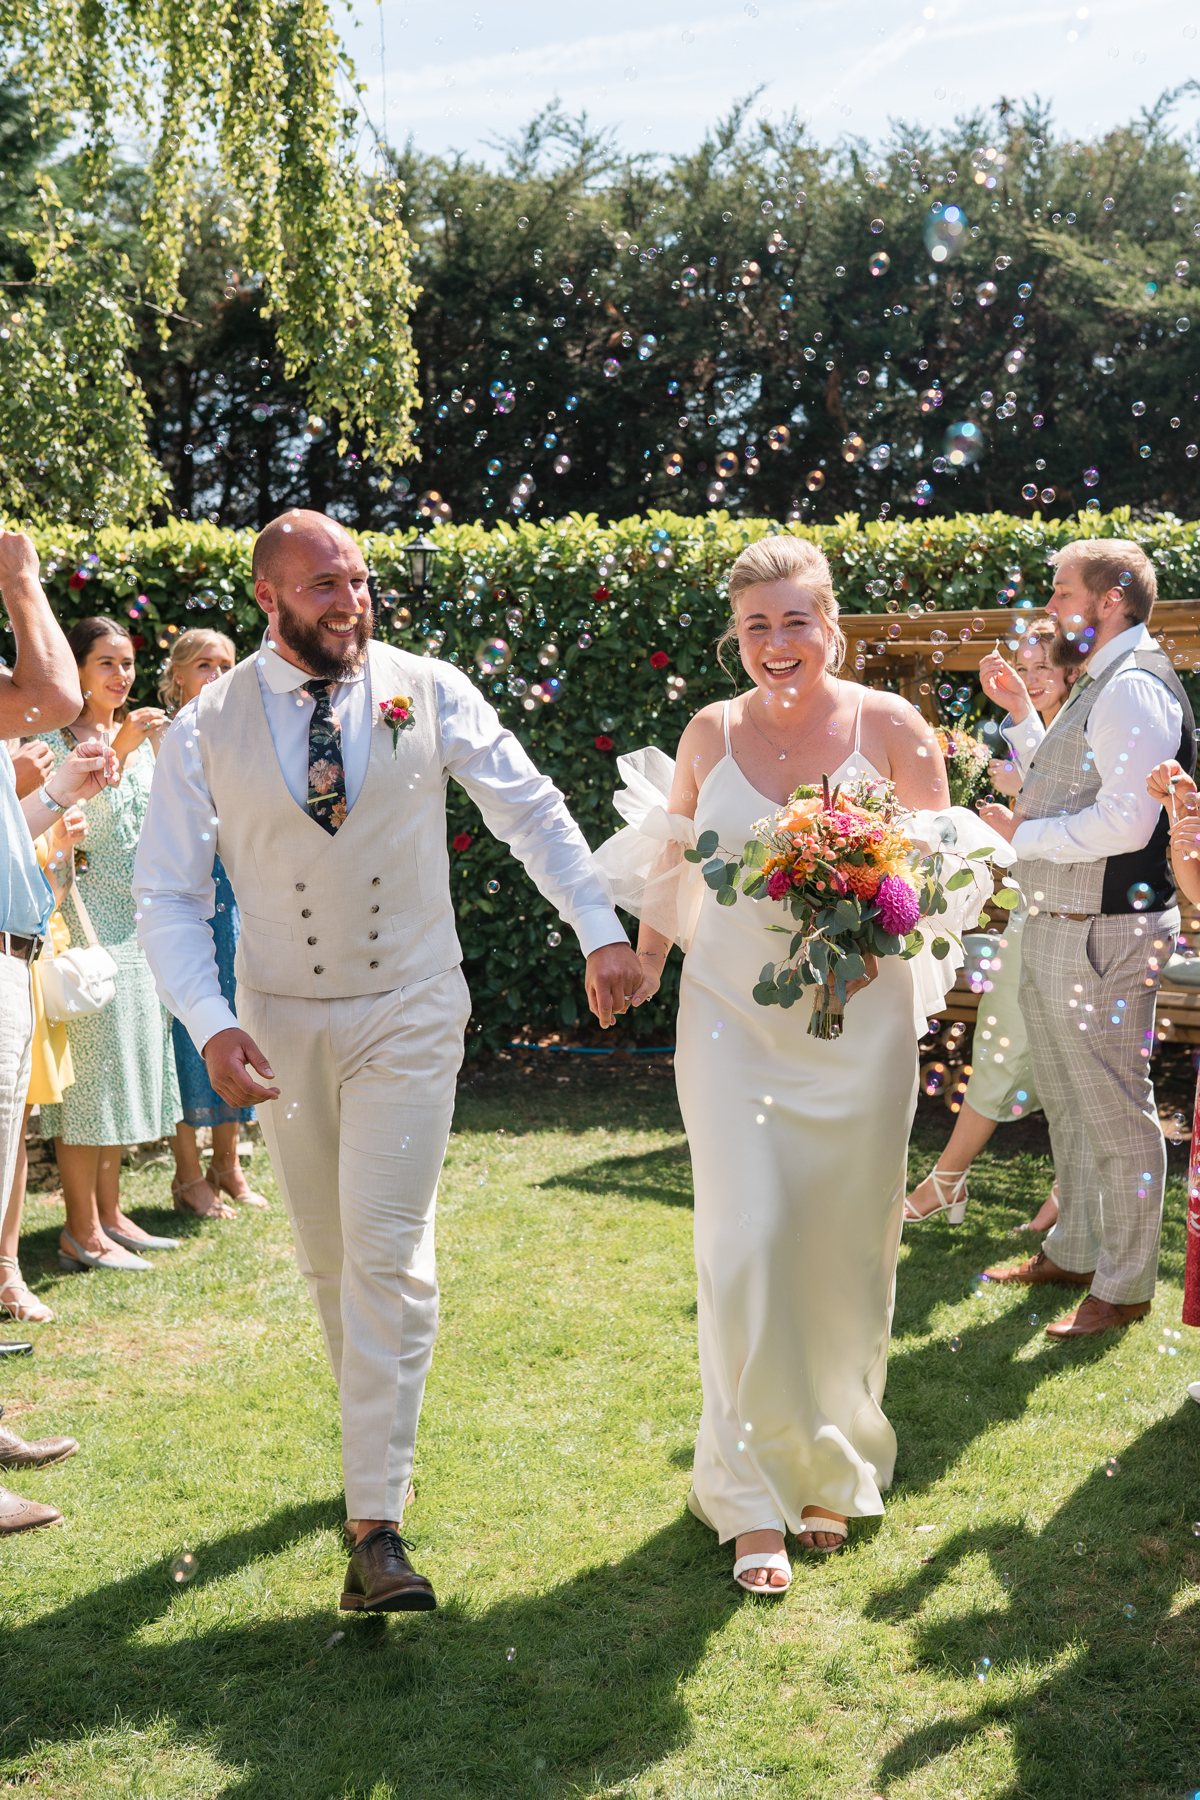 newlyweds walk through bubbles in intimate ceremony